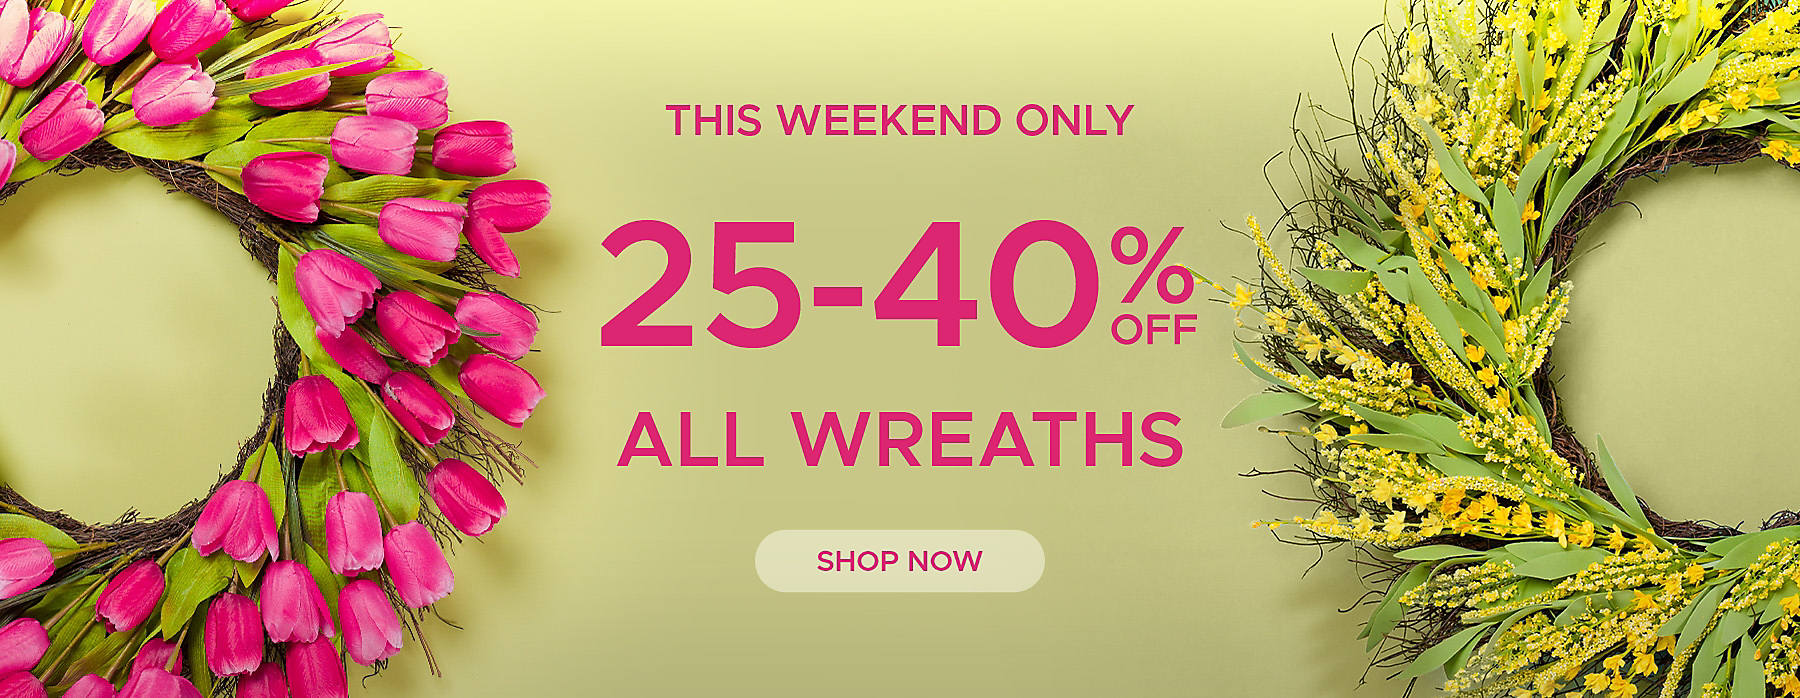 This Weekend Only 25-40% off All Wreaths Shop Now